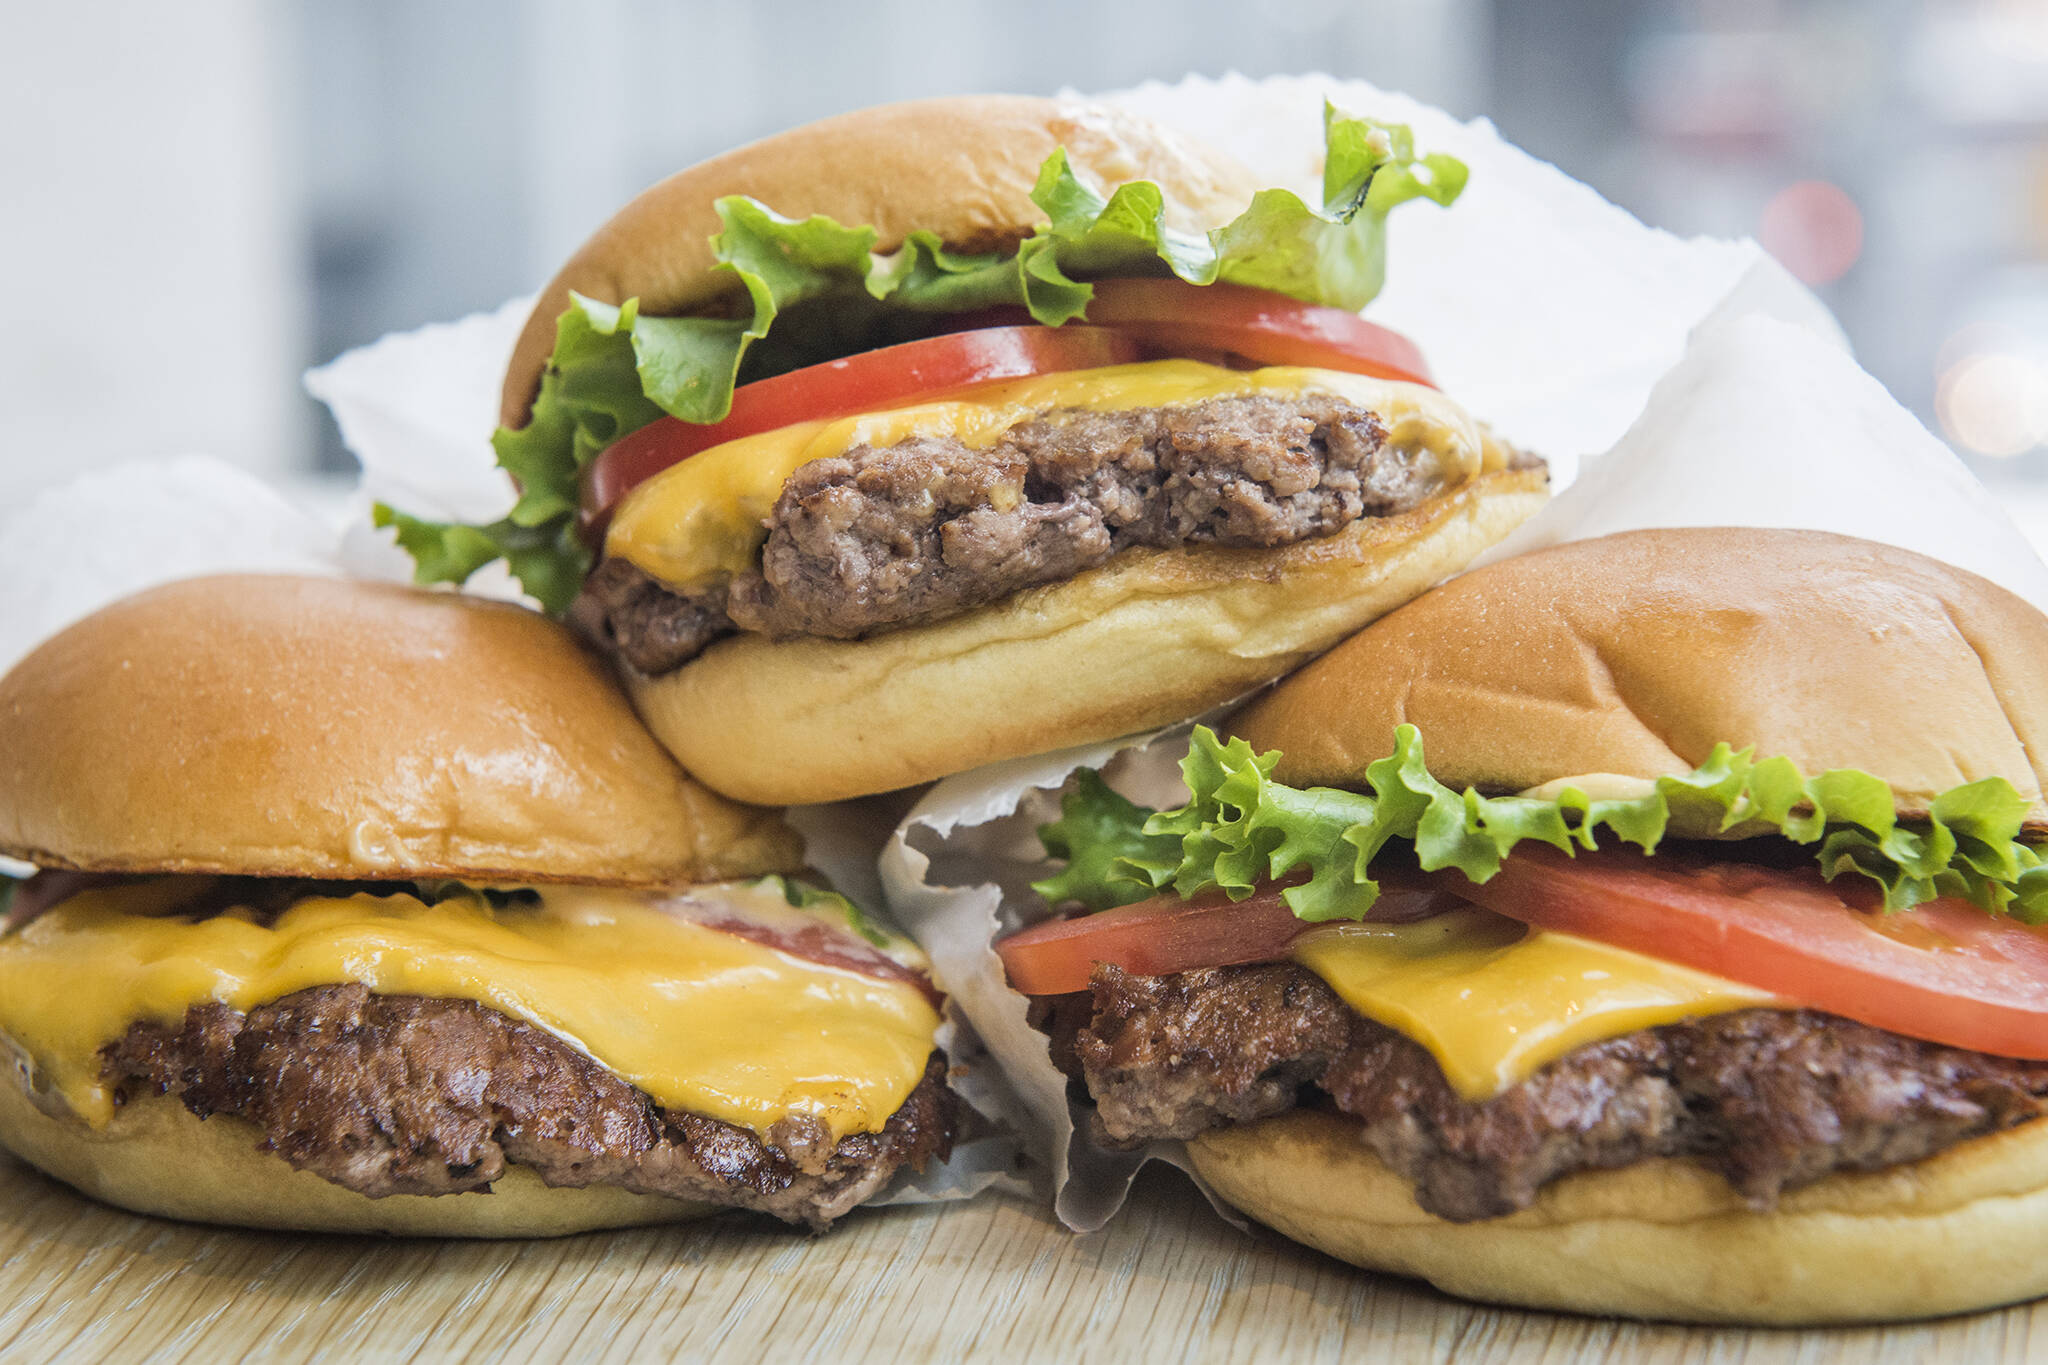 Shake Shack has announced the opening of their first Canadian location in  Toronto